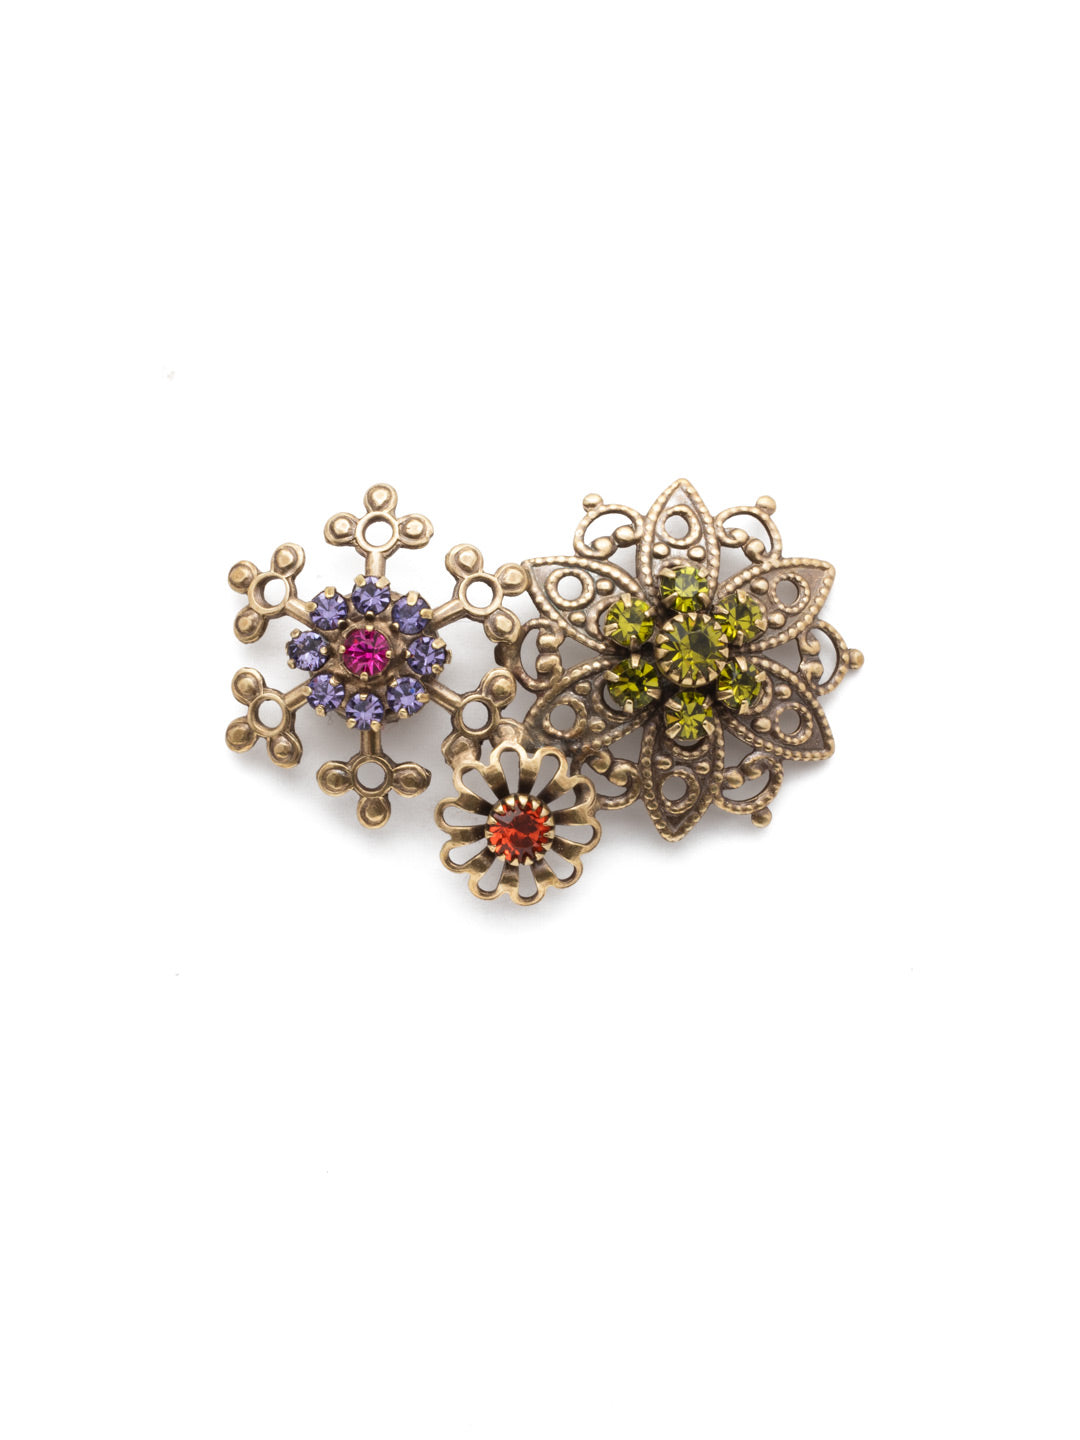 Gloria Magnetic Charm - CHM4AGMUL - <p>Designed with ornate filagree detail and a colorful array of crystals. This multi-functional accessory charm embellishment can be used to decorate, your bag, blazer, dress or refrigerator. Securely fastening with a magnet, leaving no pin holes or damage to fabric. Promptly remove charm embellishment from clothing, bag or accessory before washing. From Sorrelli's Multi  collection in our Antique Gold-tone finish.</p>